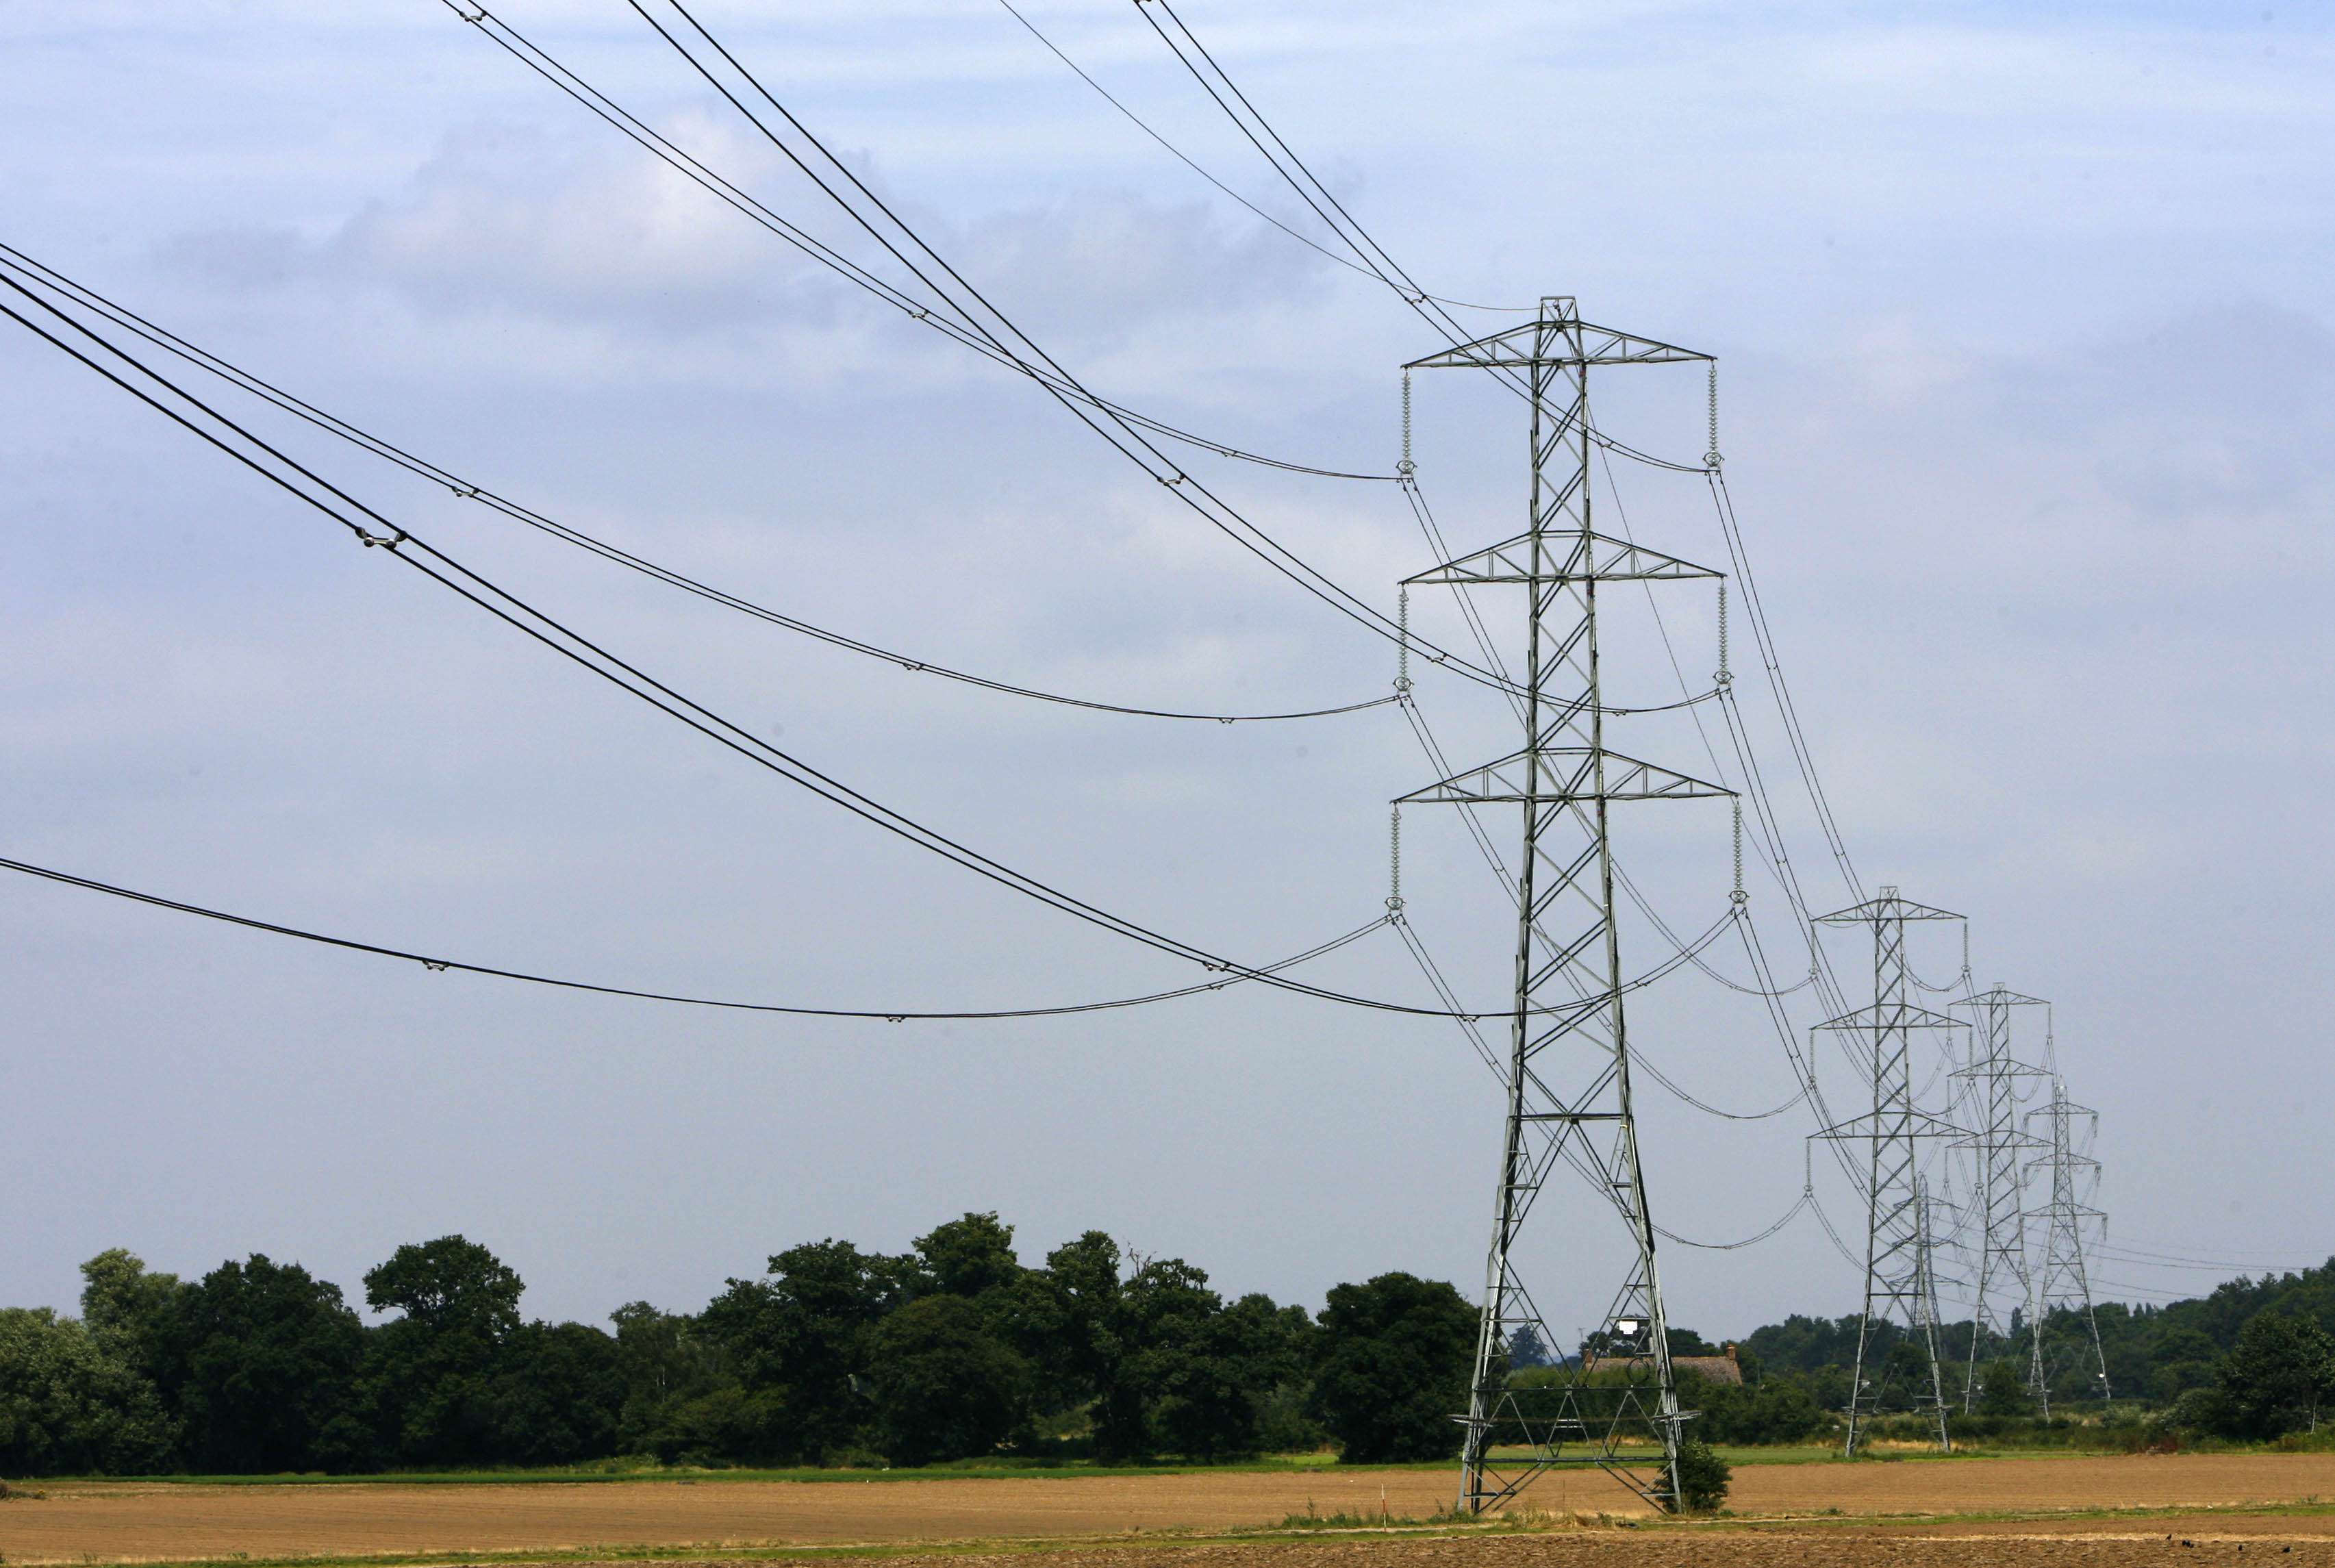 FILE PHOTOl Electricity pylons are pictured near Cobham in Surrey, southern England July 25, 2008. REUTERS/Luke MacGregor